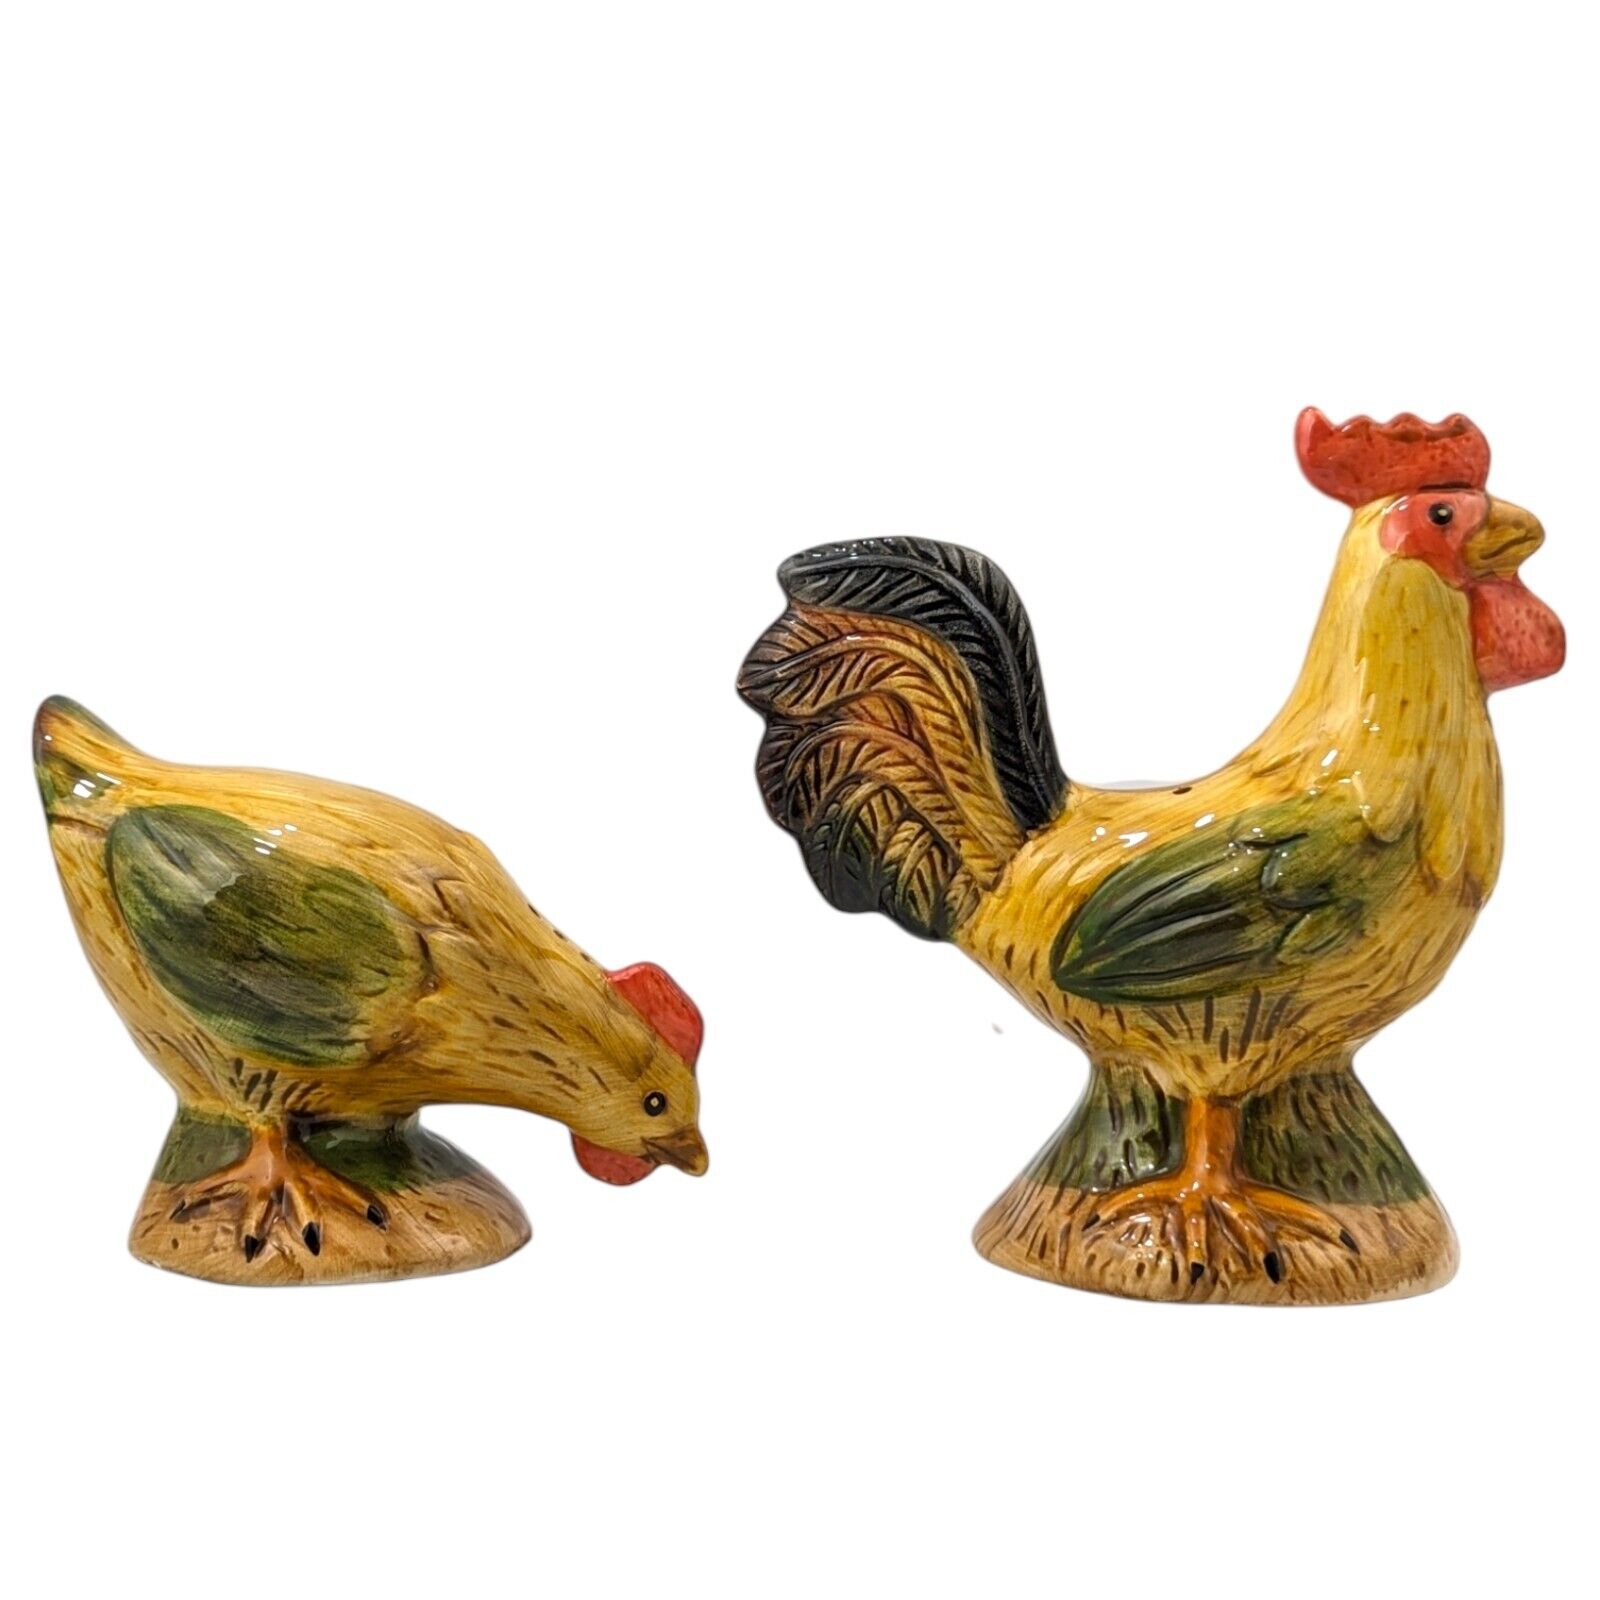 Vintage 1990s Rooster And Hen Salt And Pepper Shaker Set Cottagecore Rustic